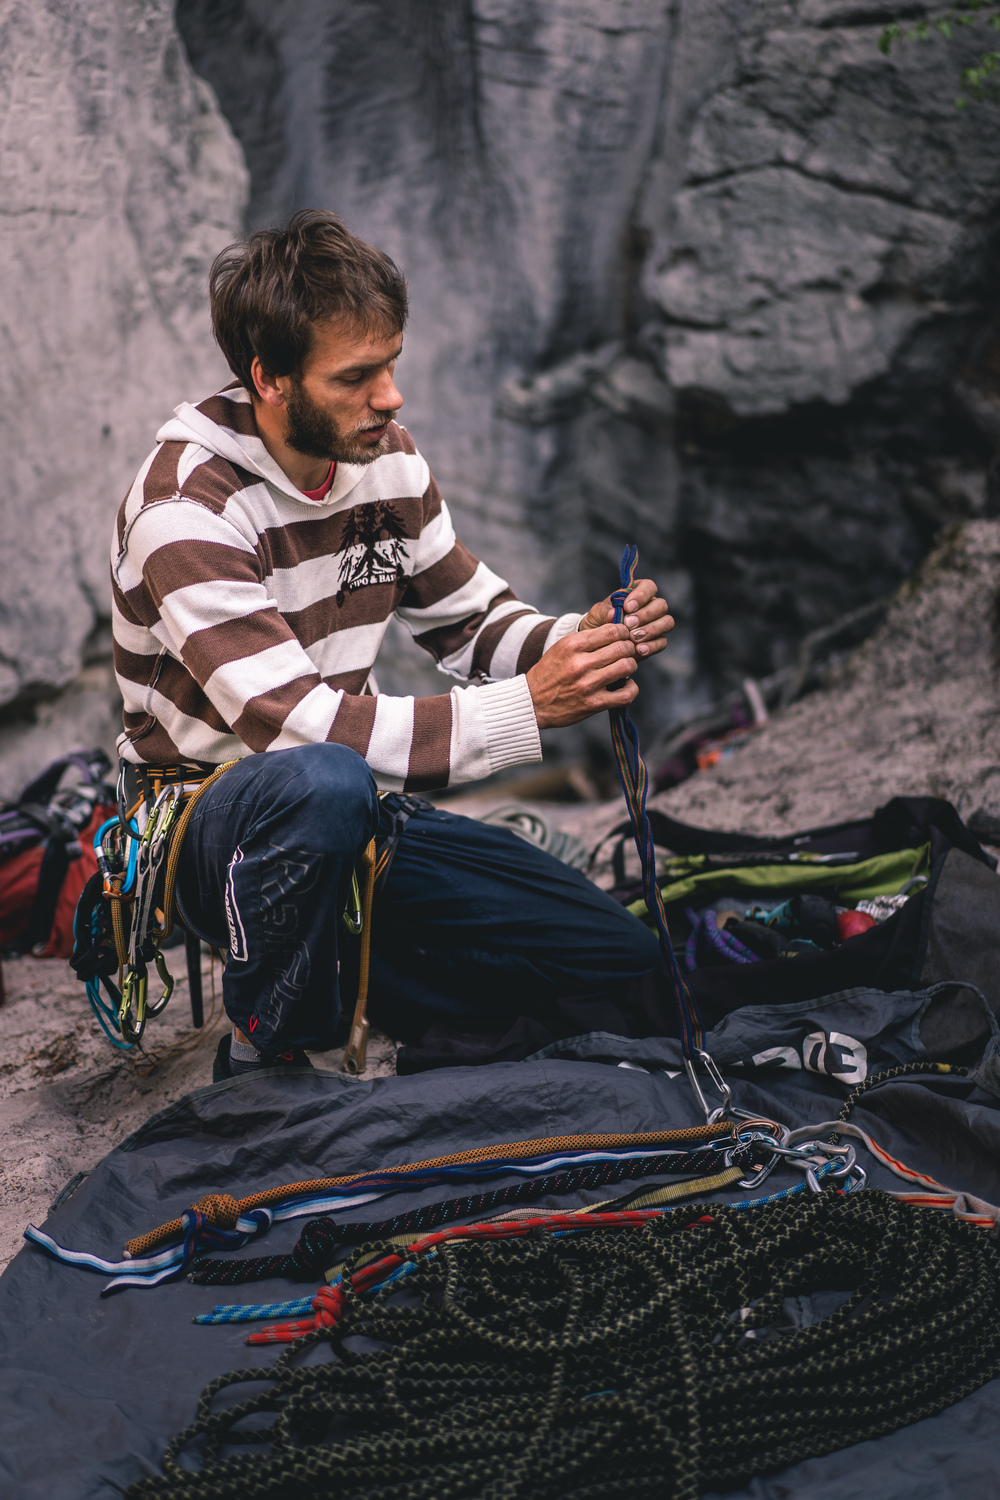 Local Czech guide showing how to knot slings for a Czech rack